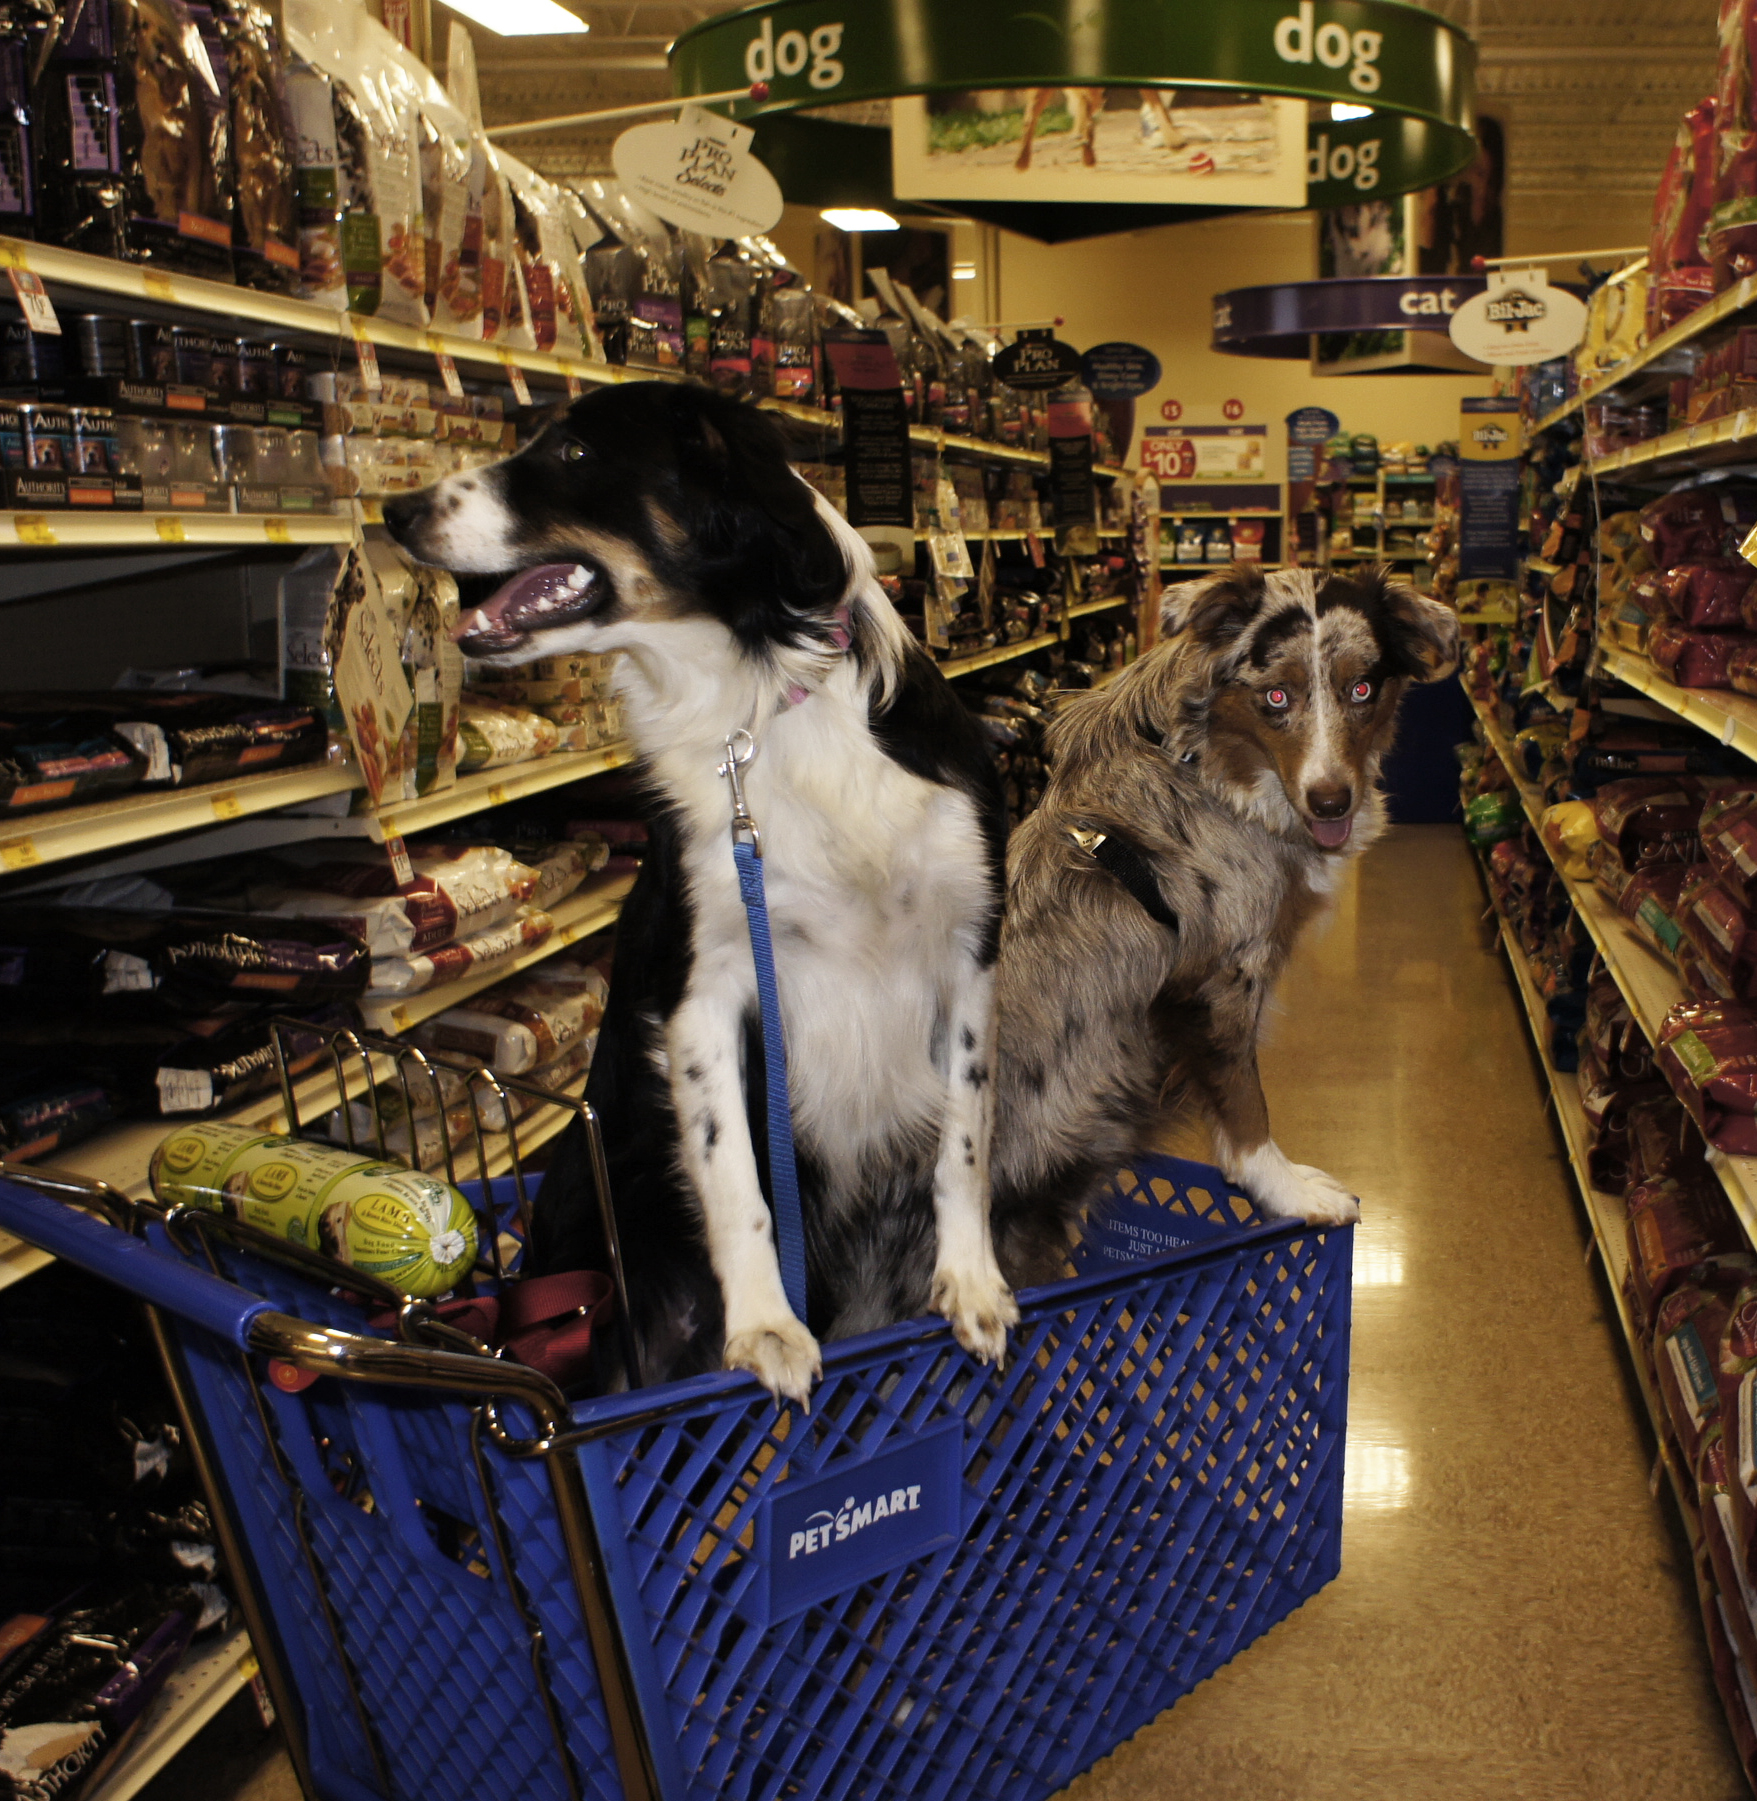 A photograph shows 2 dogs riding in a shopping cart inside of a Pet smart store.